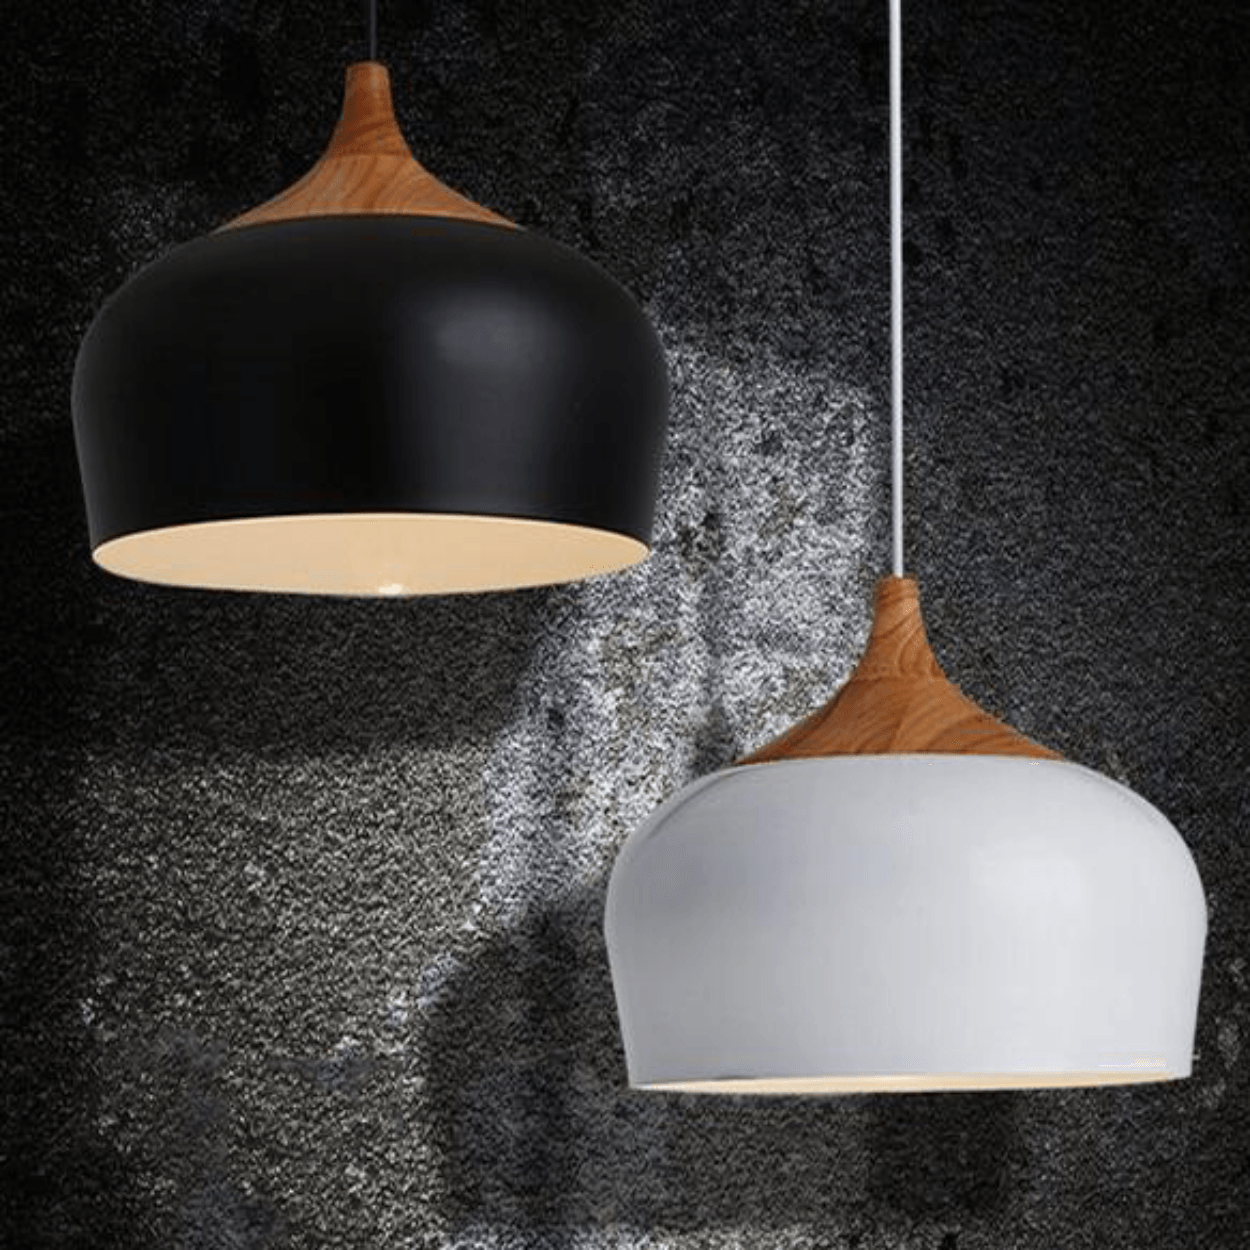 ANKUR MODERN NORDIC DOME WITH NATURAL WOOD PENDANT LIGHT at the lowest ...